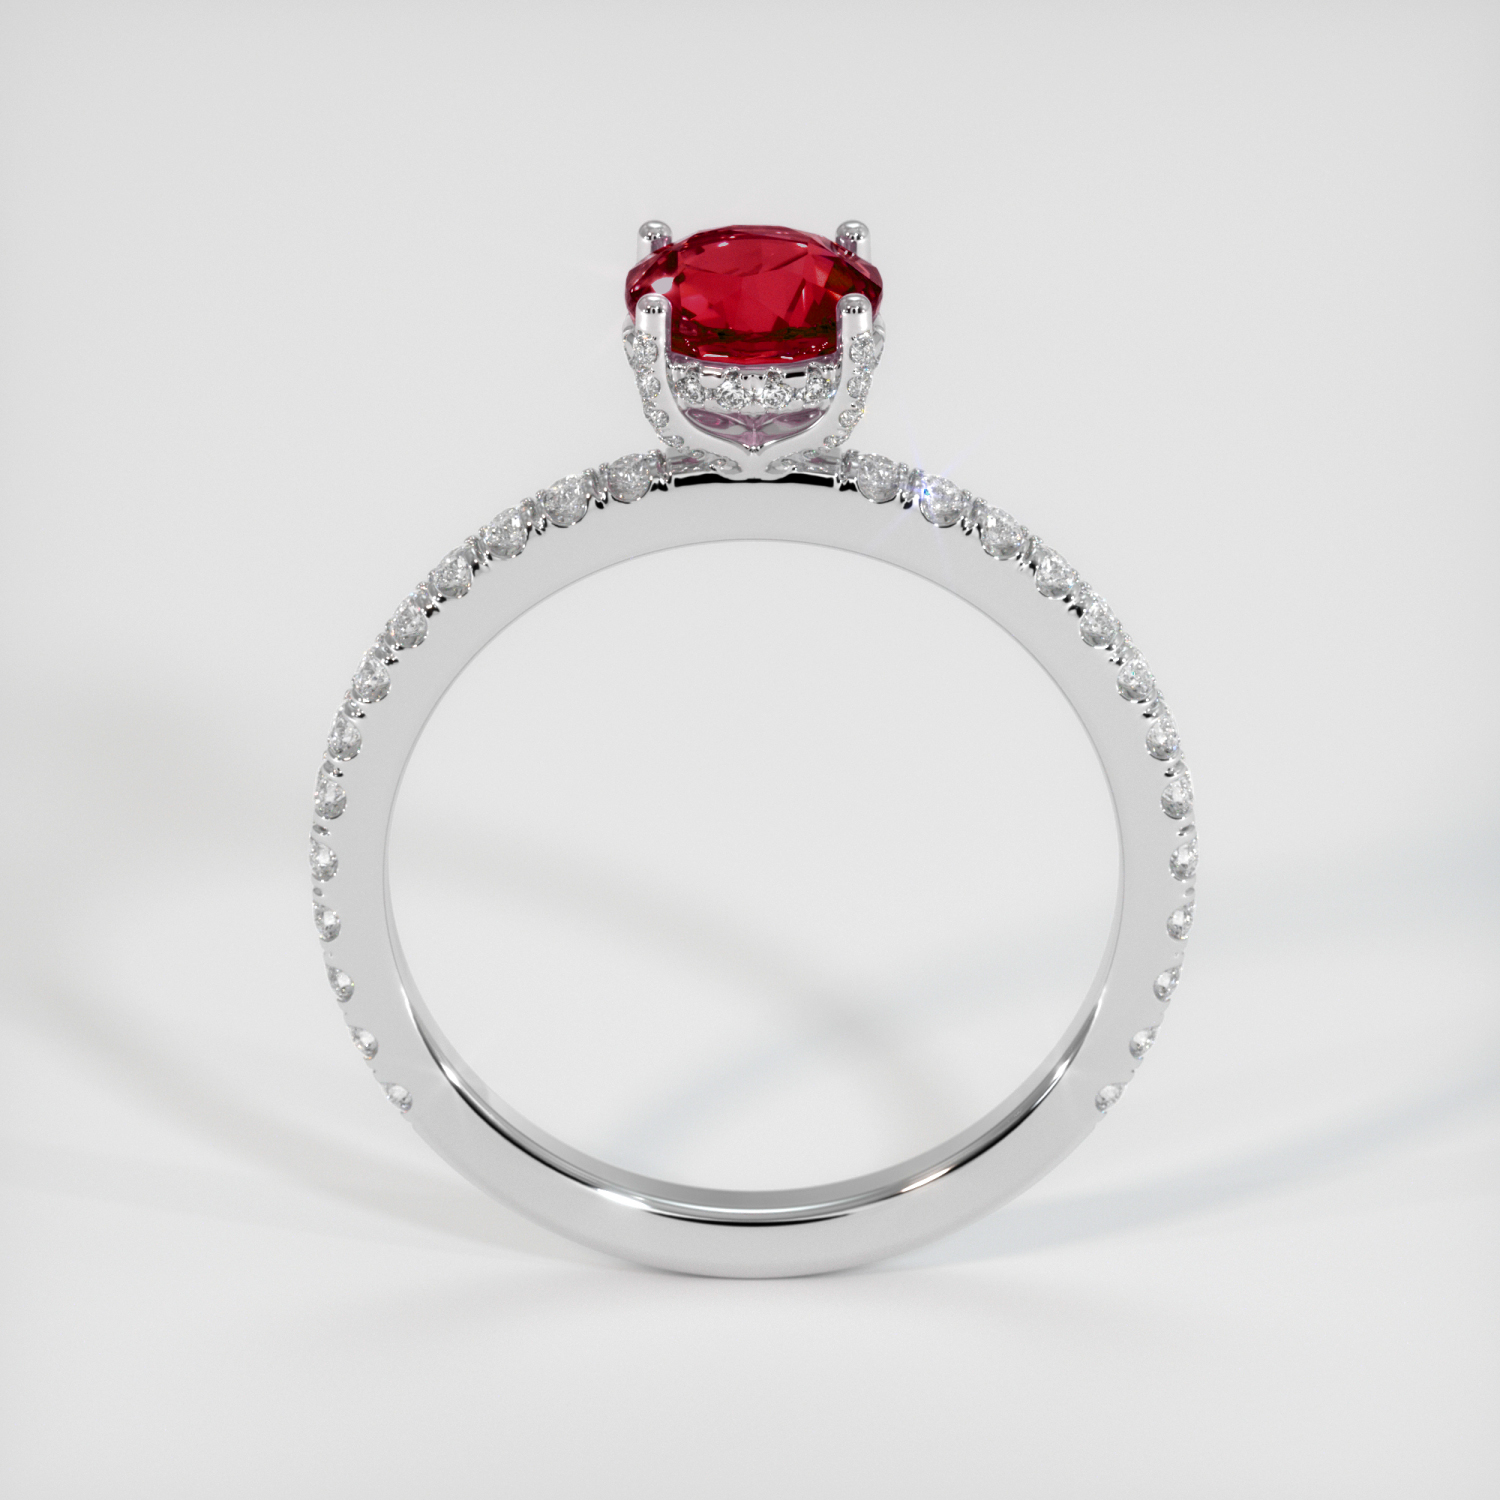 Ruby Ring 1.74 Ct. 14K White Gold | The Natural Ruby Company